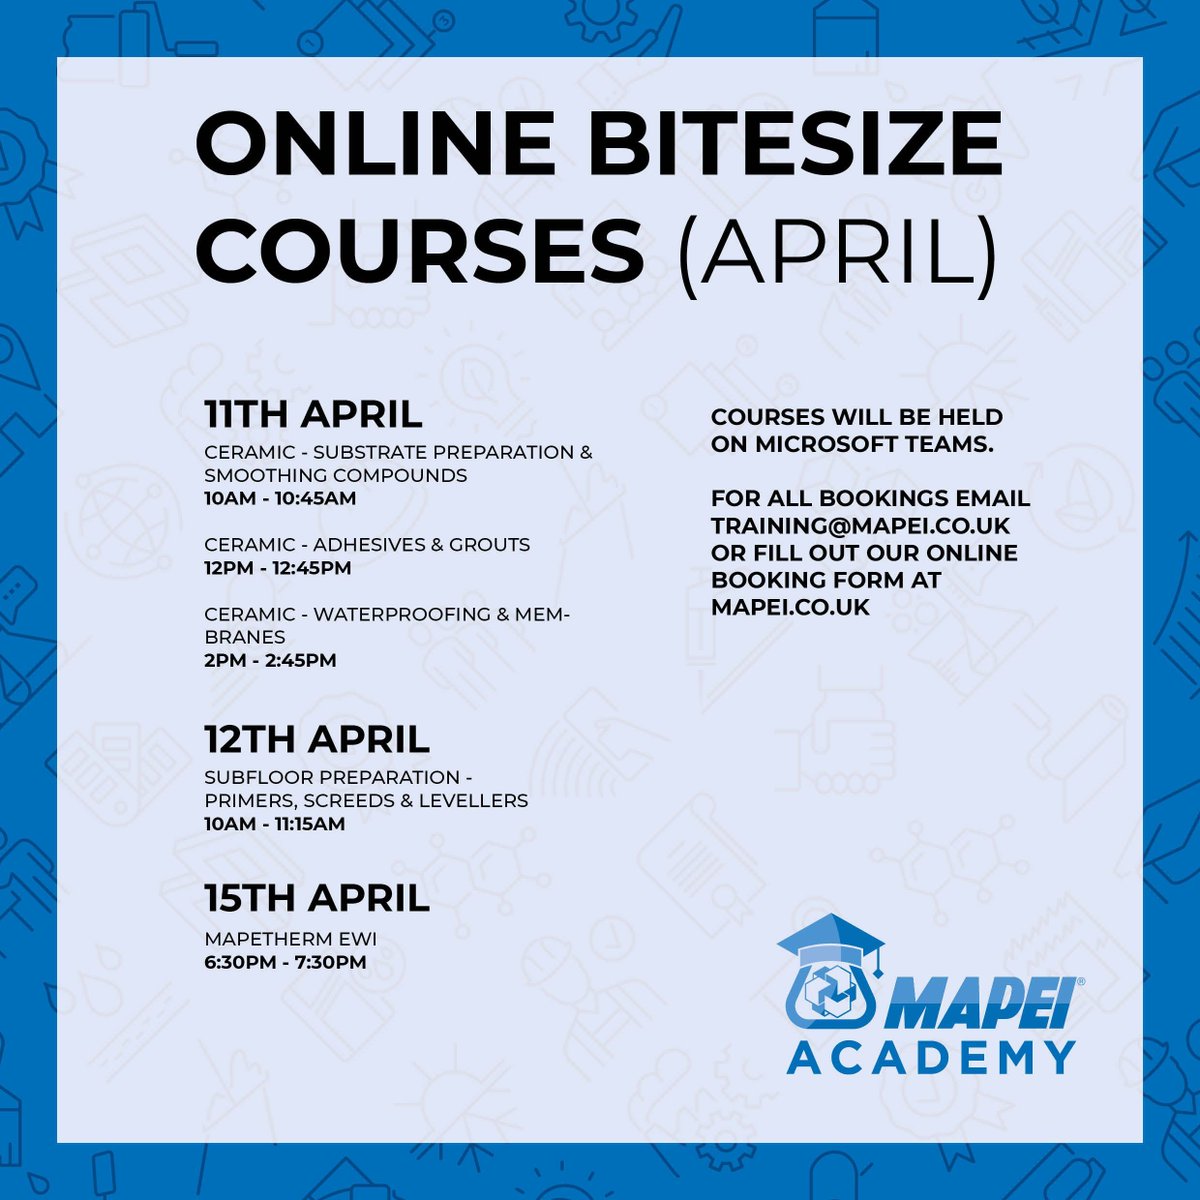 Our free #technical #online #training #courses to equip #professionals in the #construction industry. Our #webinars cover local standards and how #Mapei systems are the solutions to your #project.  buff.ly/3TWGx5v

#Mapei #building #webinar #tiling #flooring #EWI